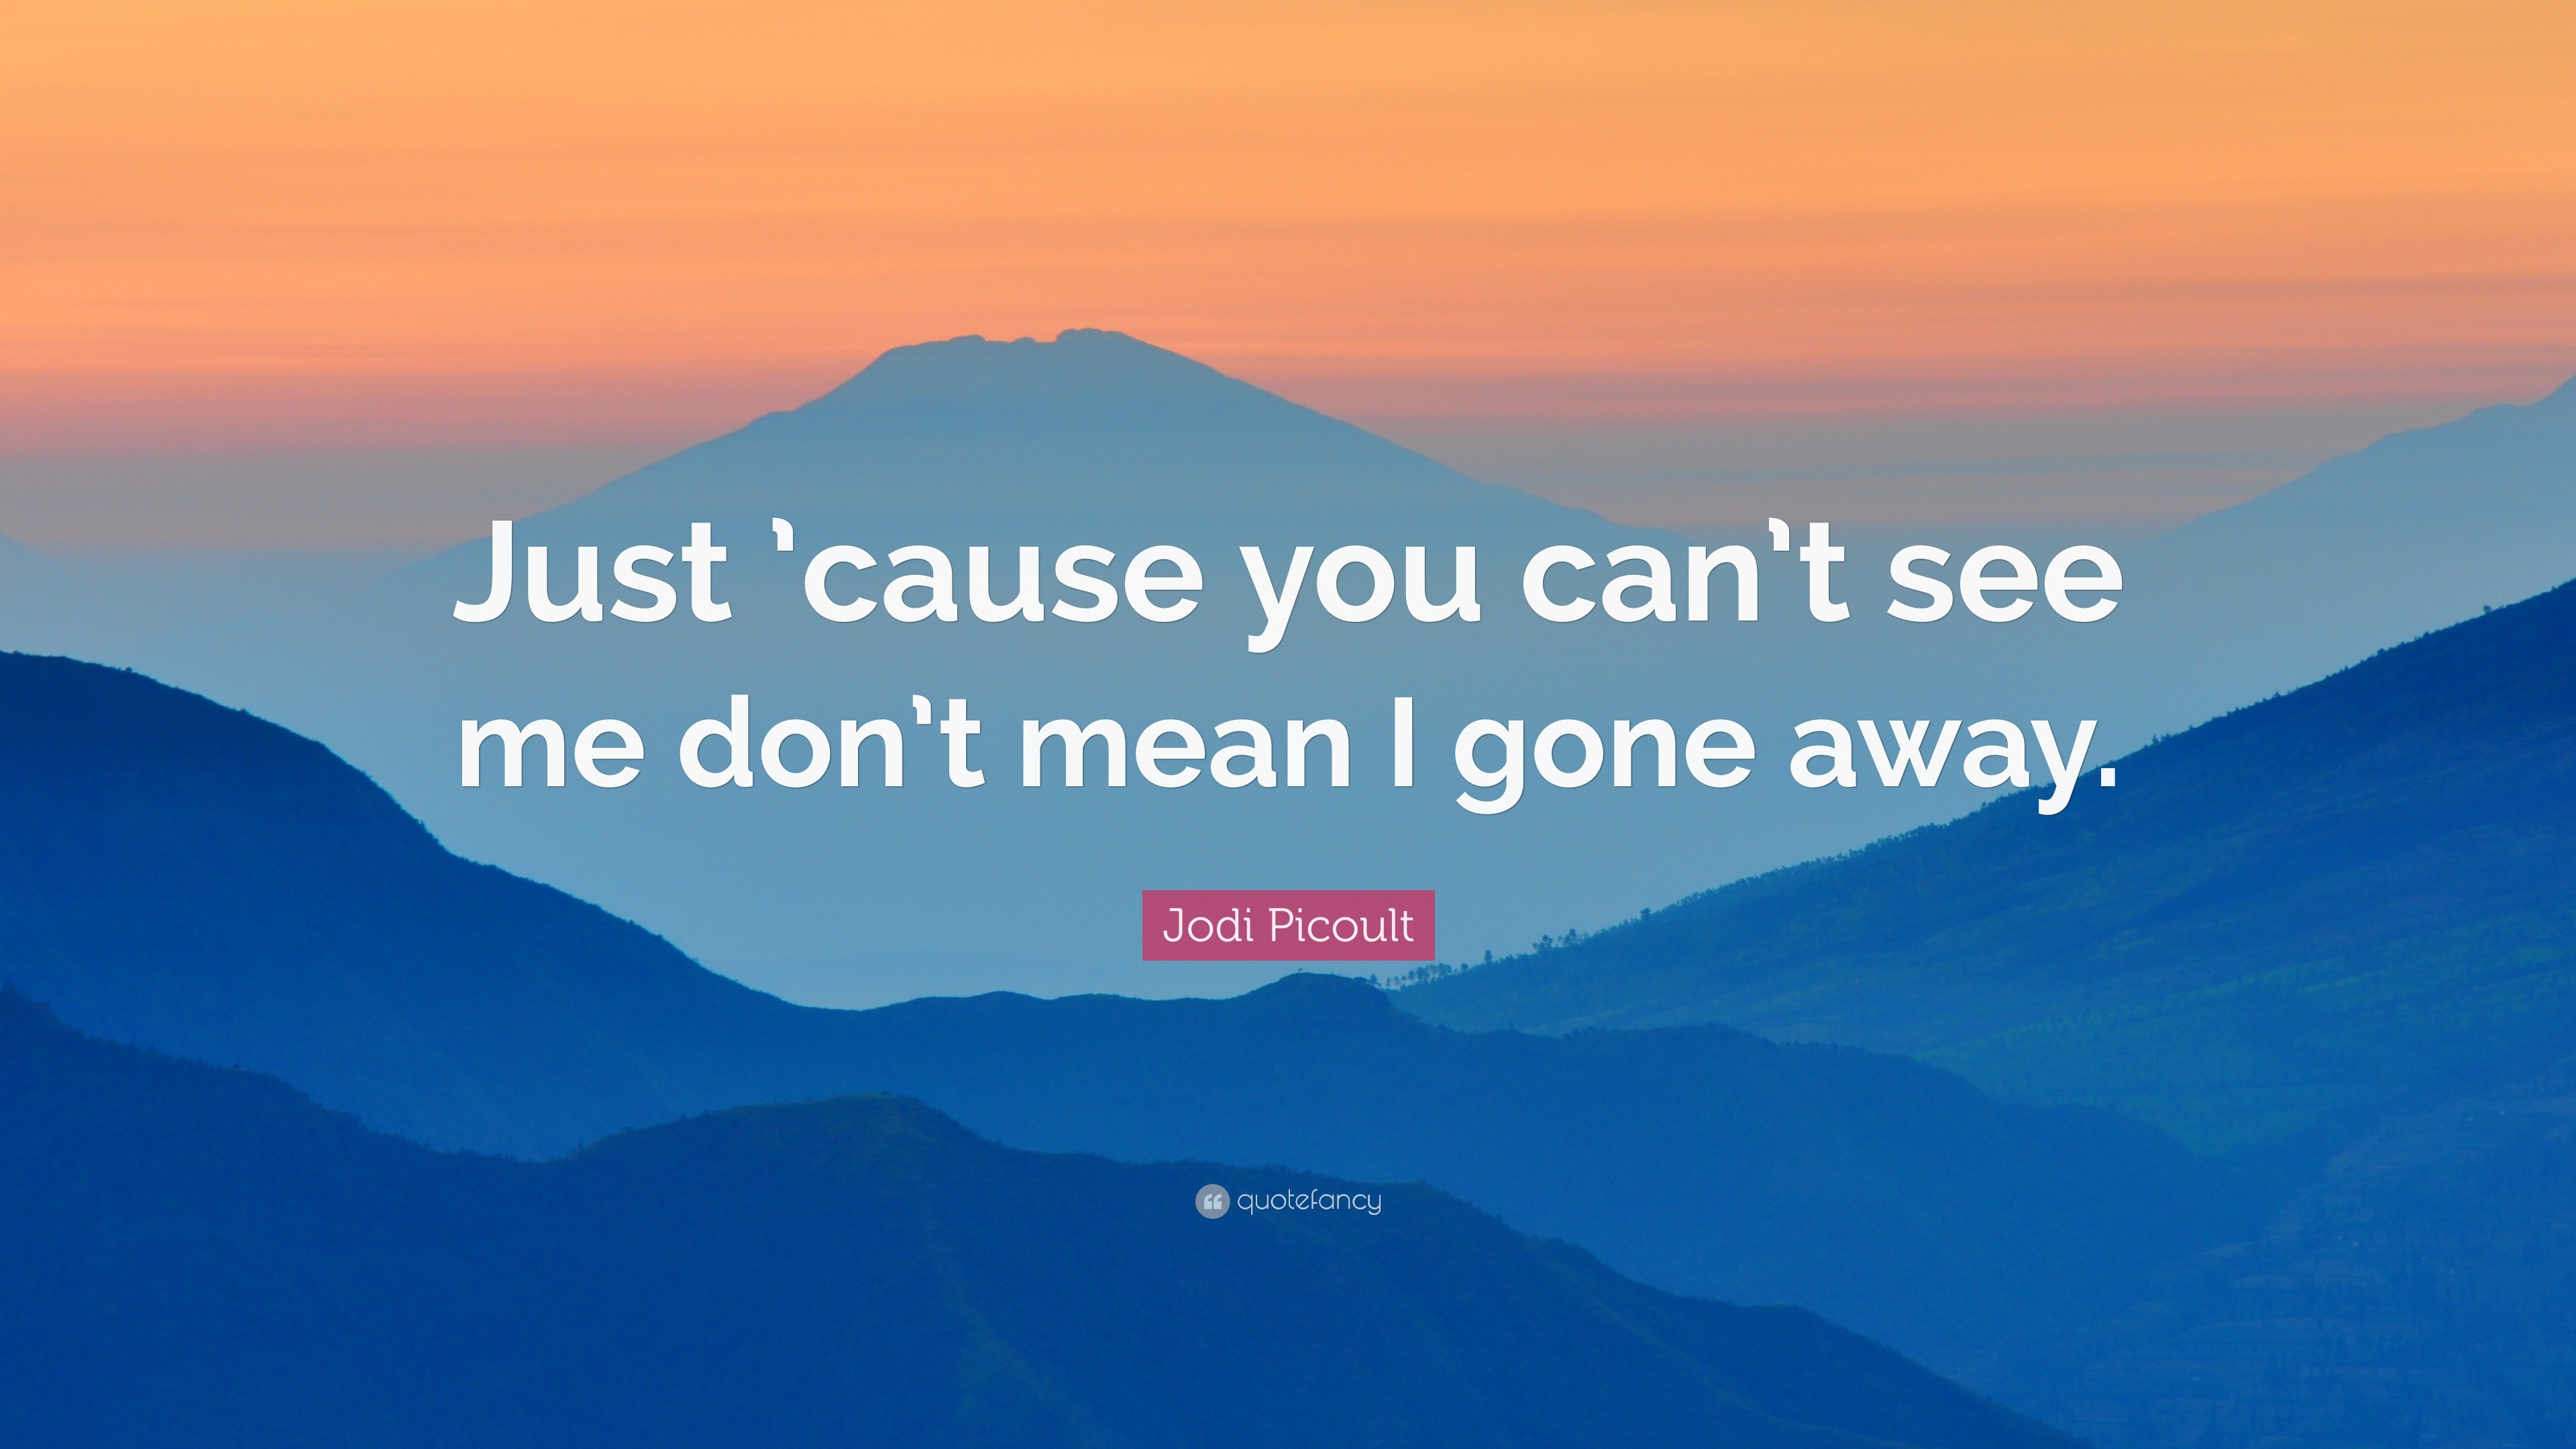 Jodi Picoult Quote Just Cause You Can T See Me Don T Mean I Gone Away 12 Wallpapers Quotefancy